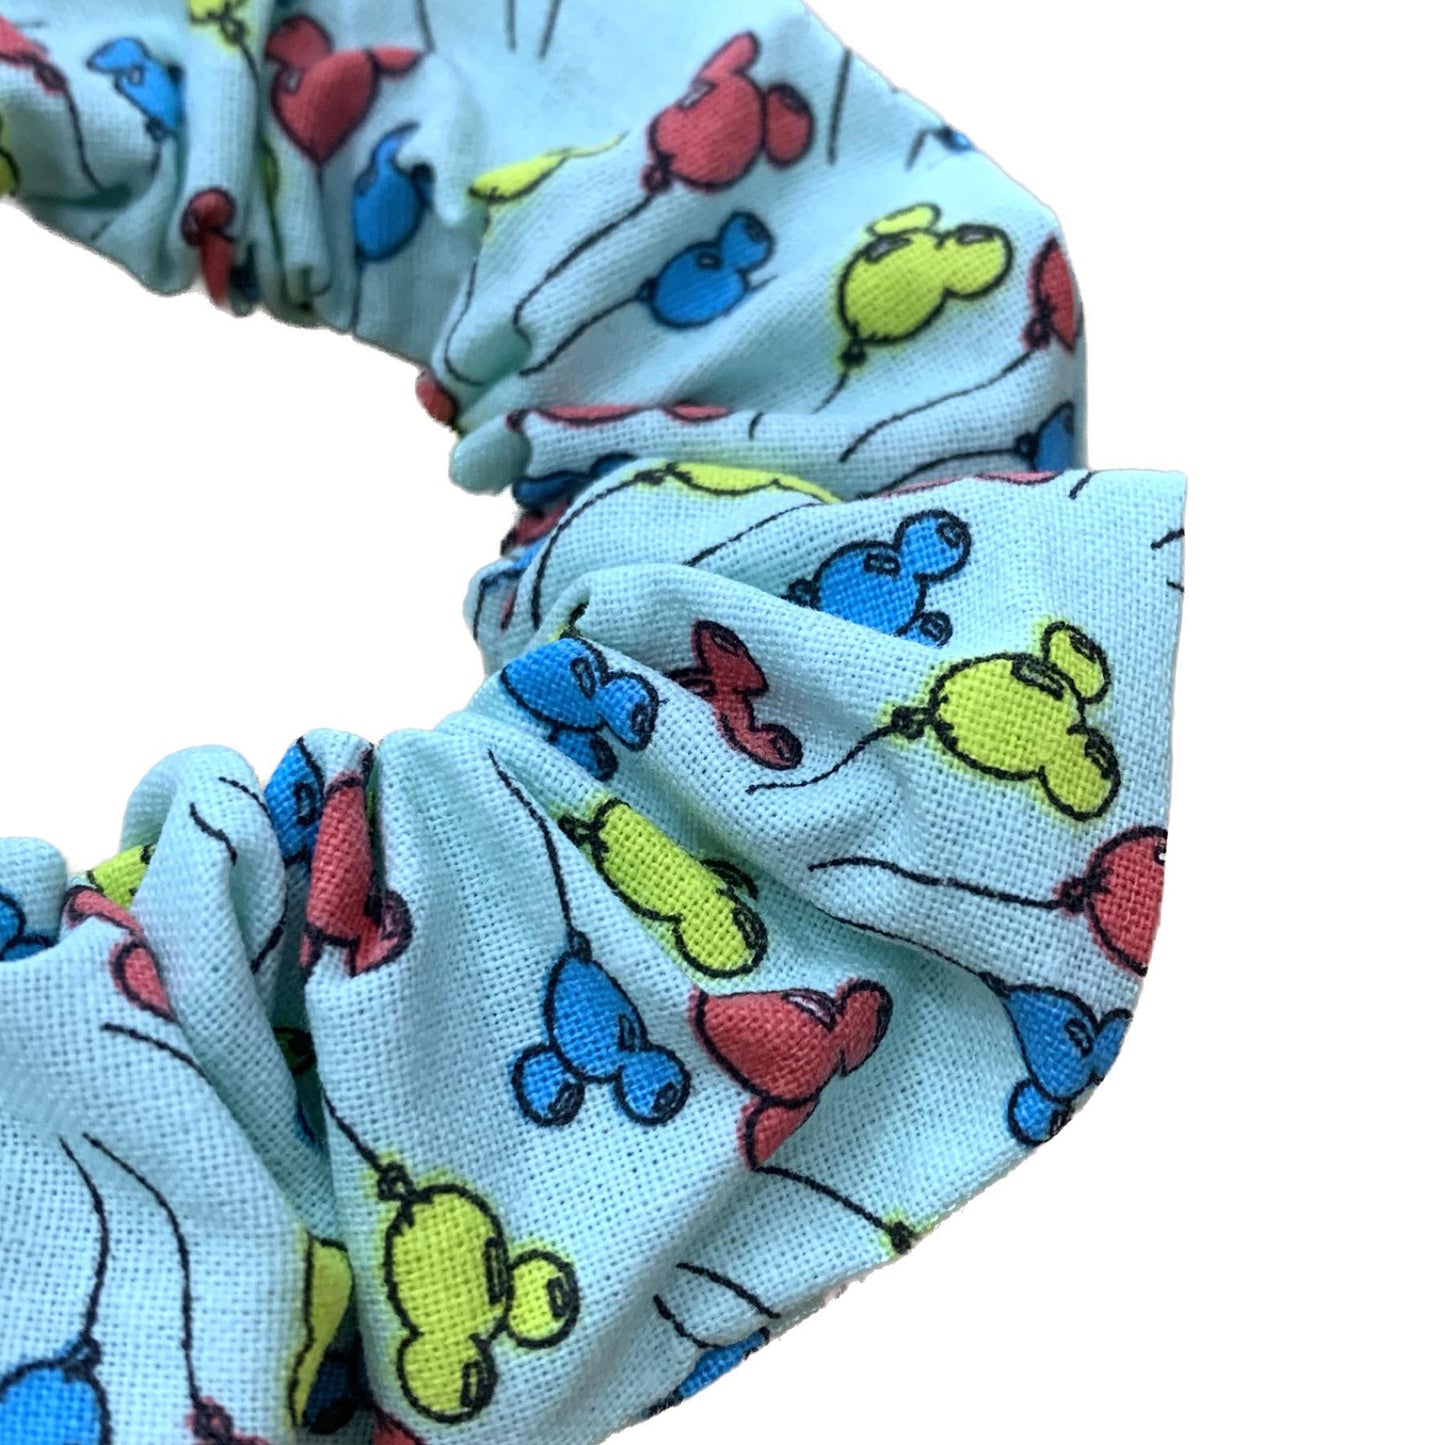 MAKIN' WHOOPEE - "Mickey Mouse Balloons" REGULAR SCRUNCHIES